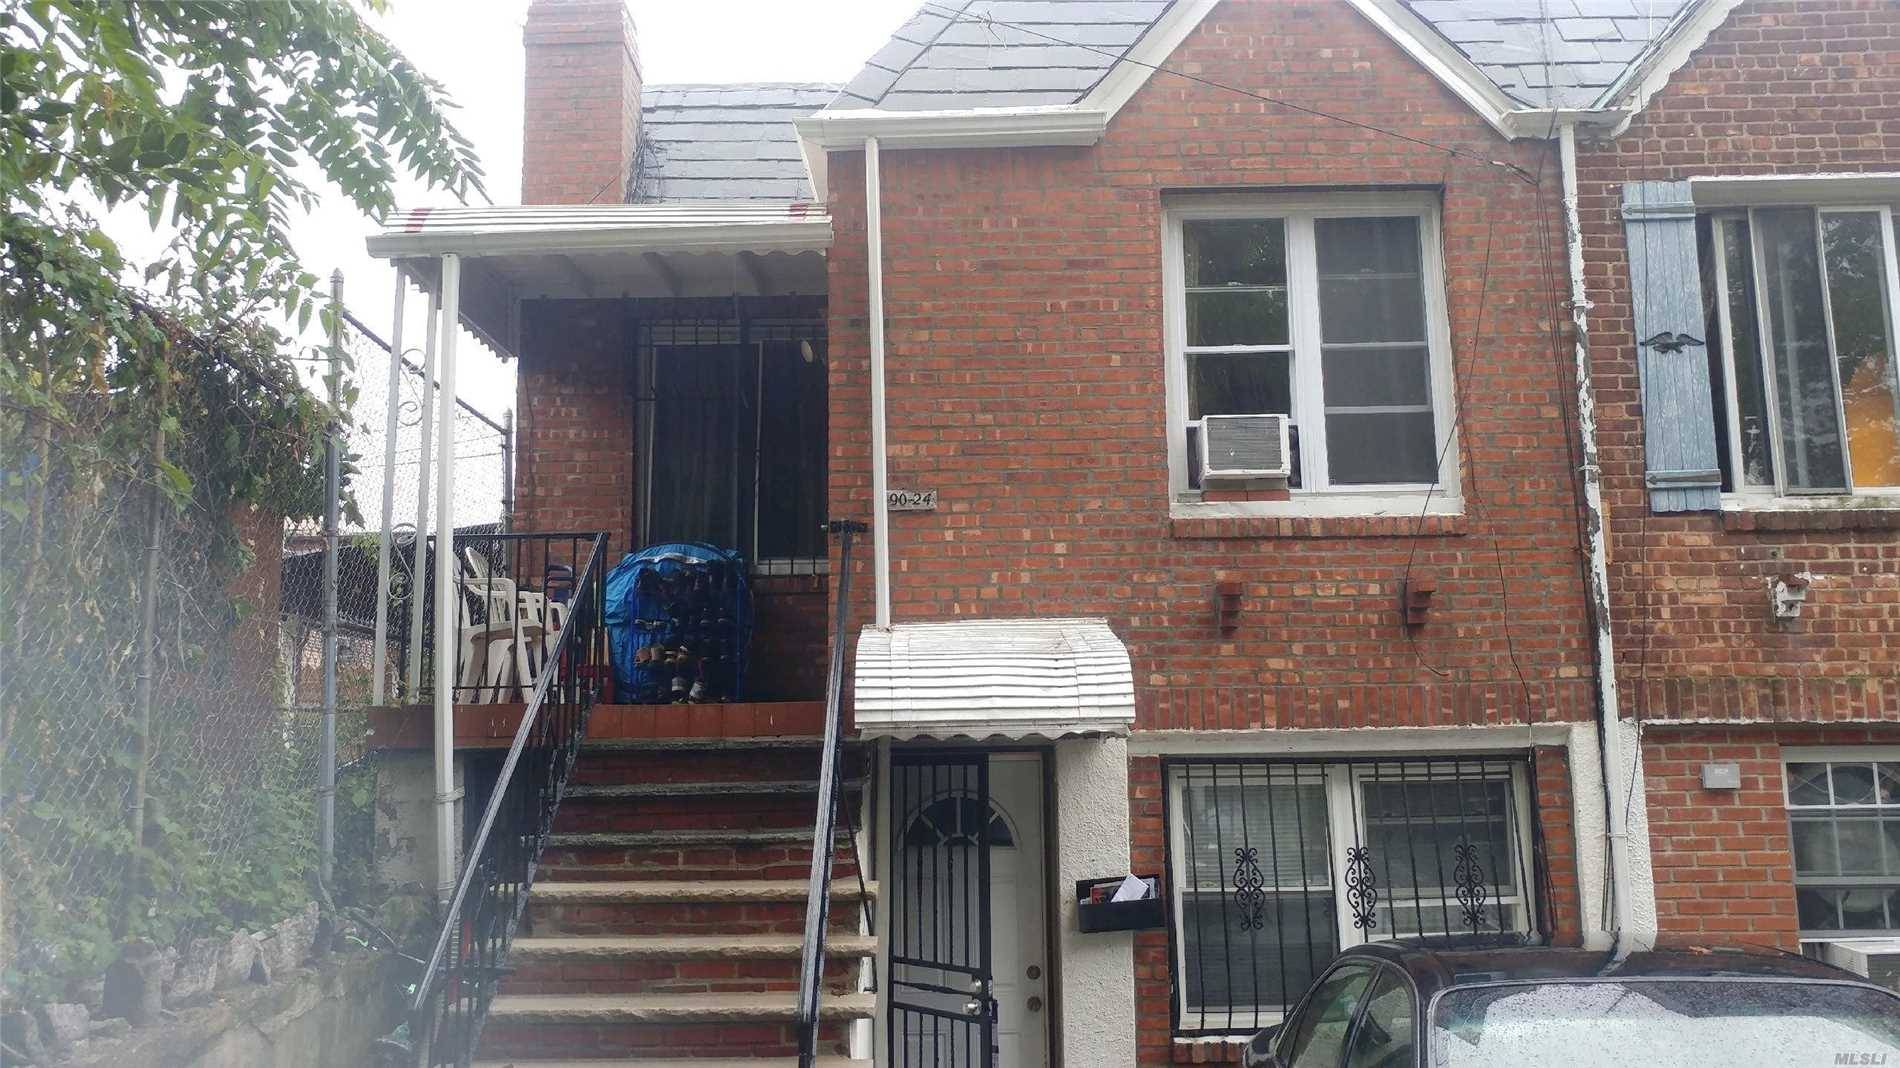 2 Family House Near La Guardia Airport With Its Own Private Driveway.